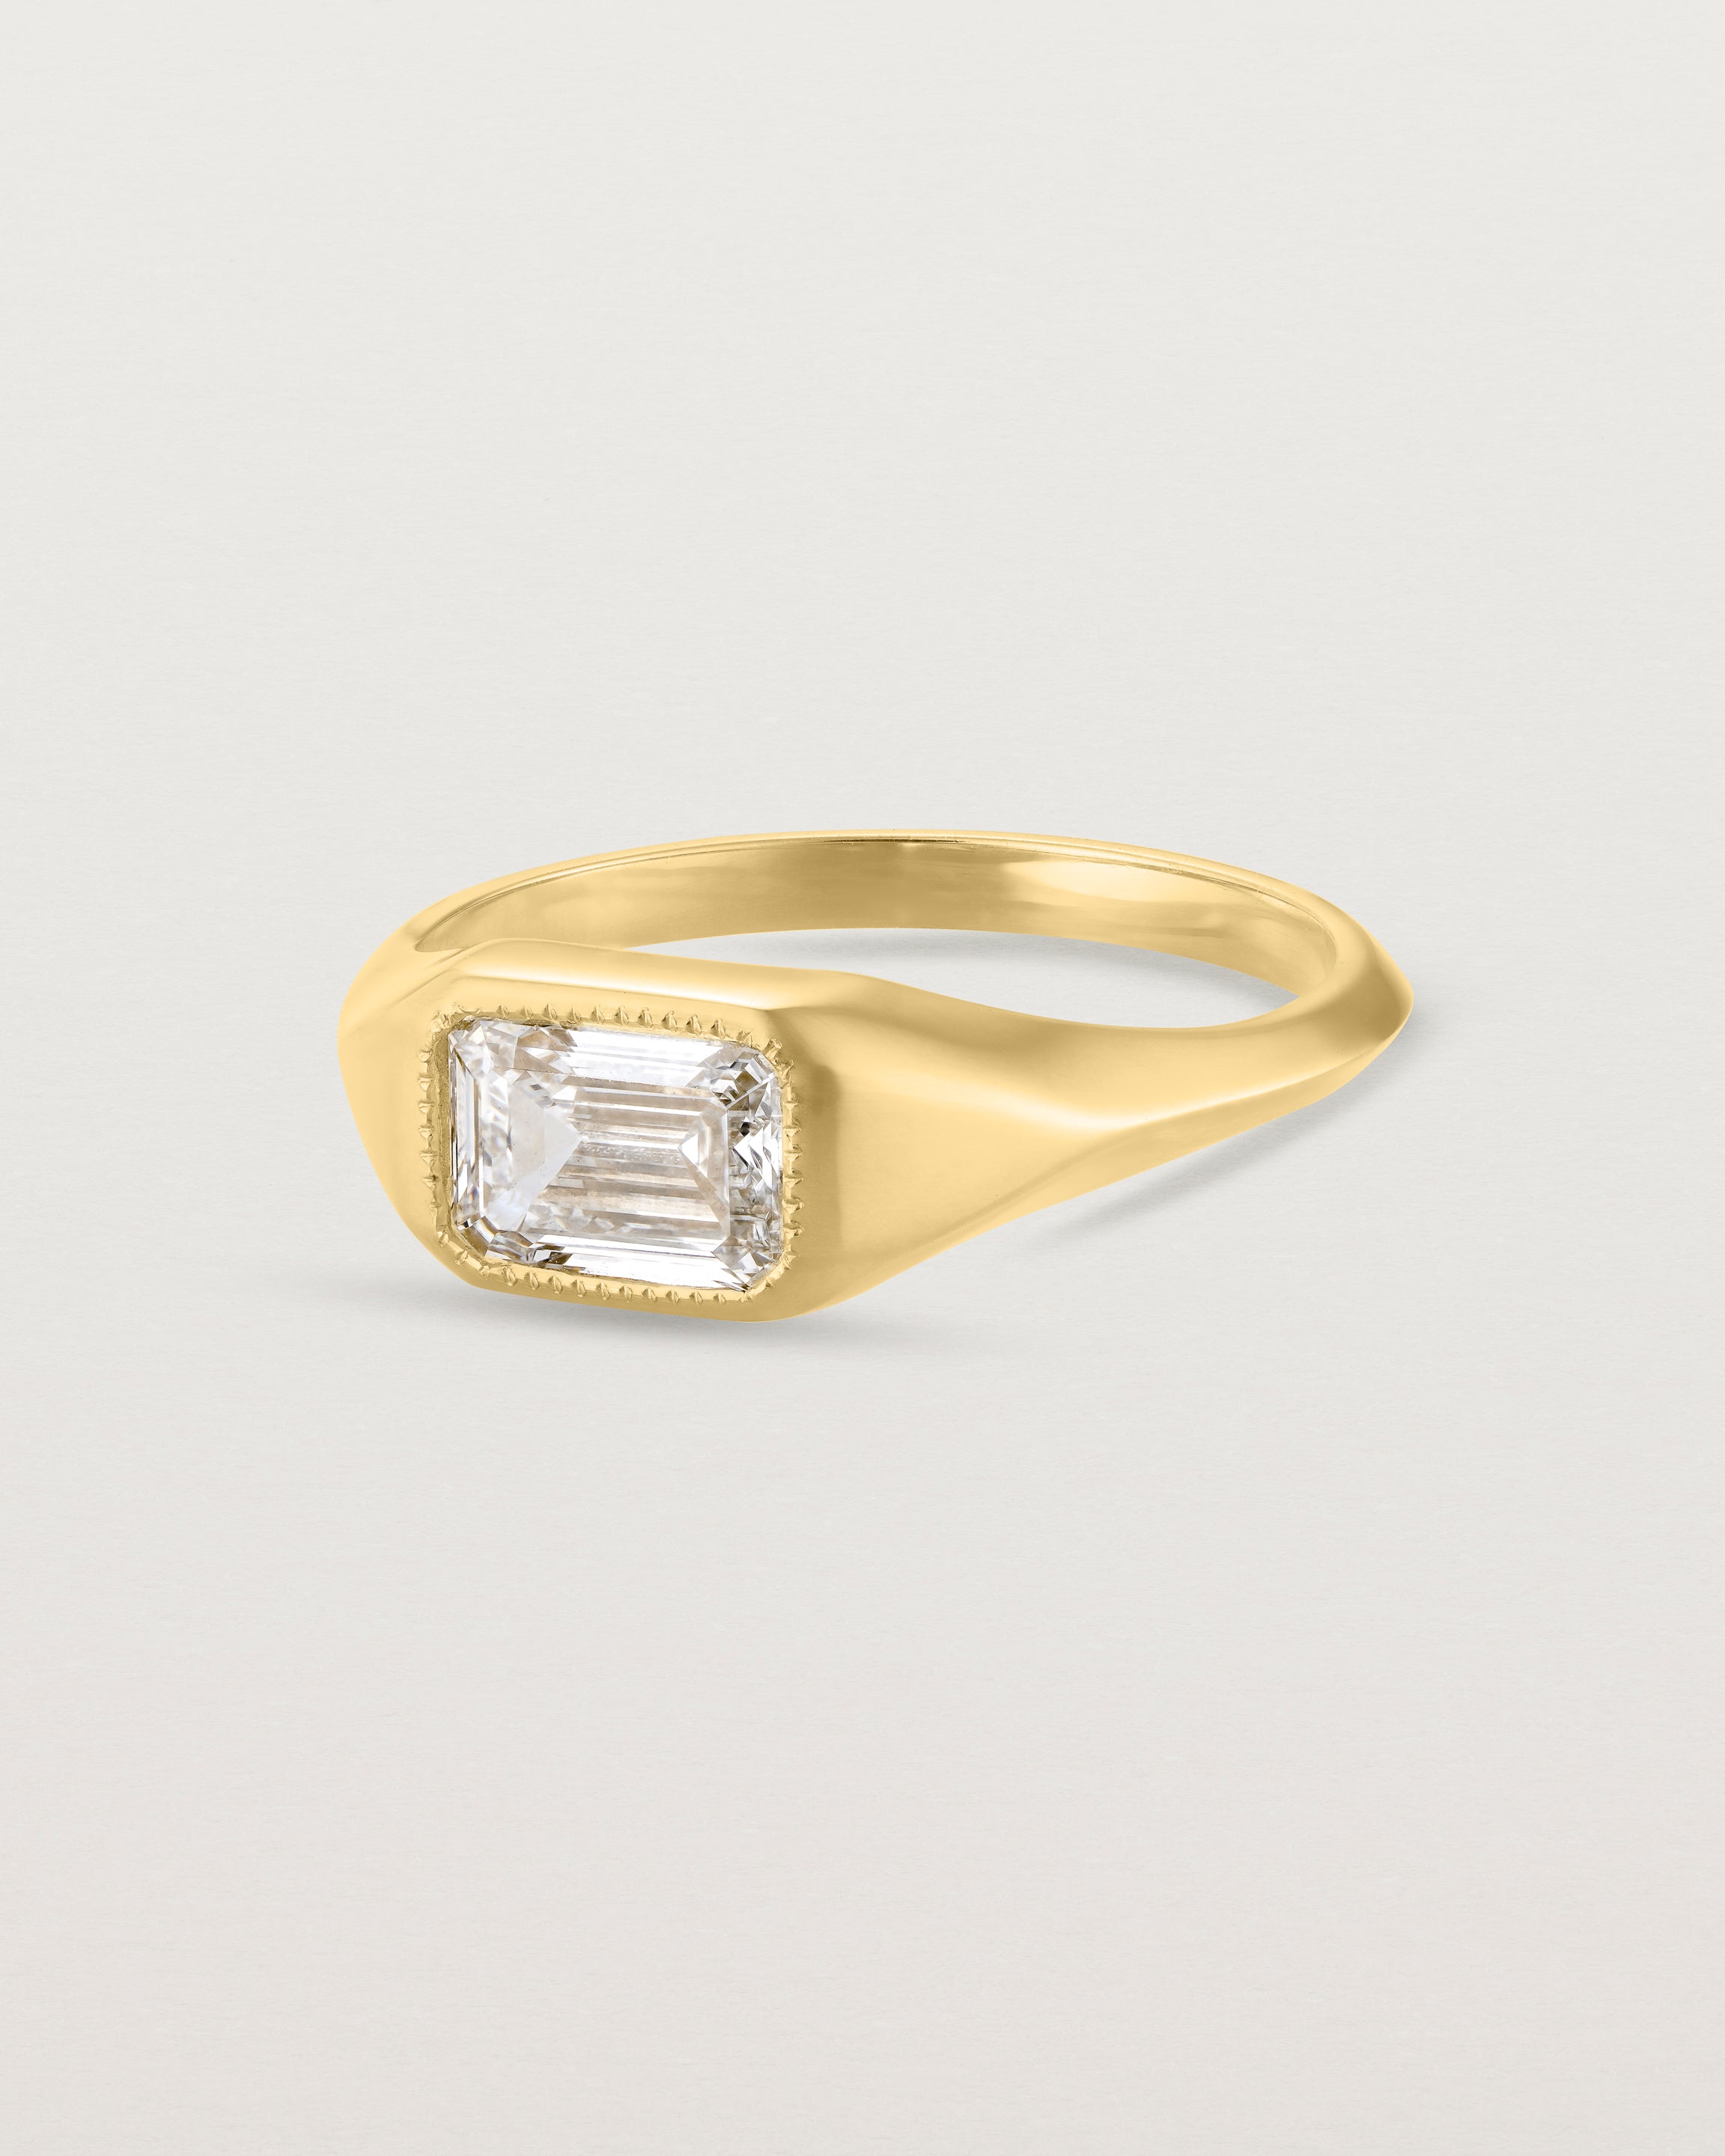 Angled view of the Átlas Emerald Signet | Laboratory Grown Diamond in yellow gold with a polished finish. 